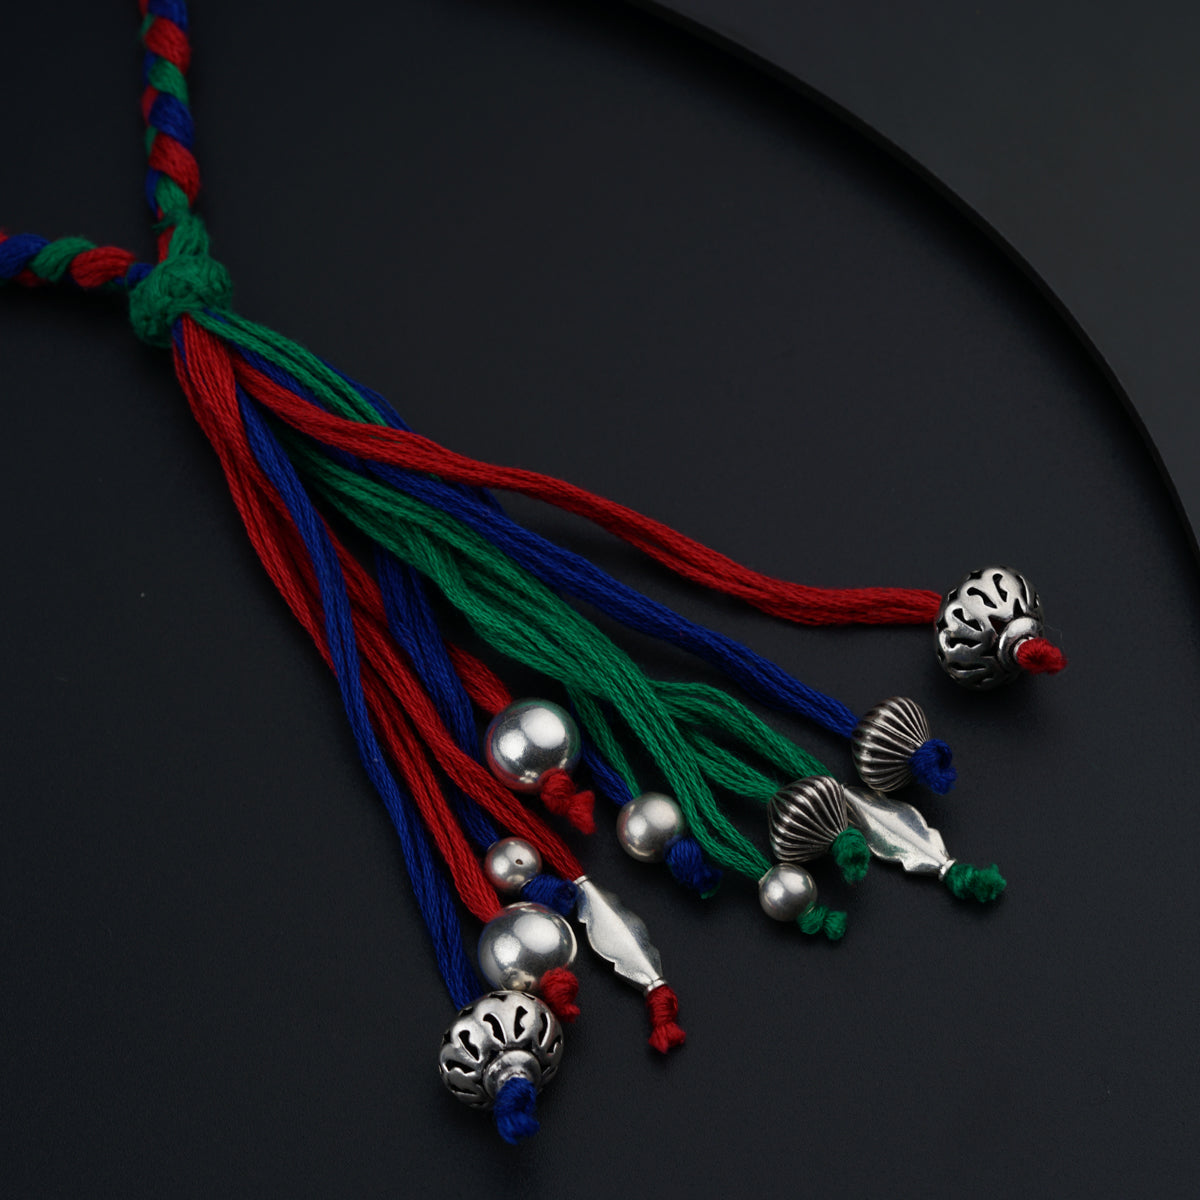 a red, blue, and green cord with bells on it